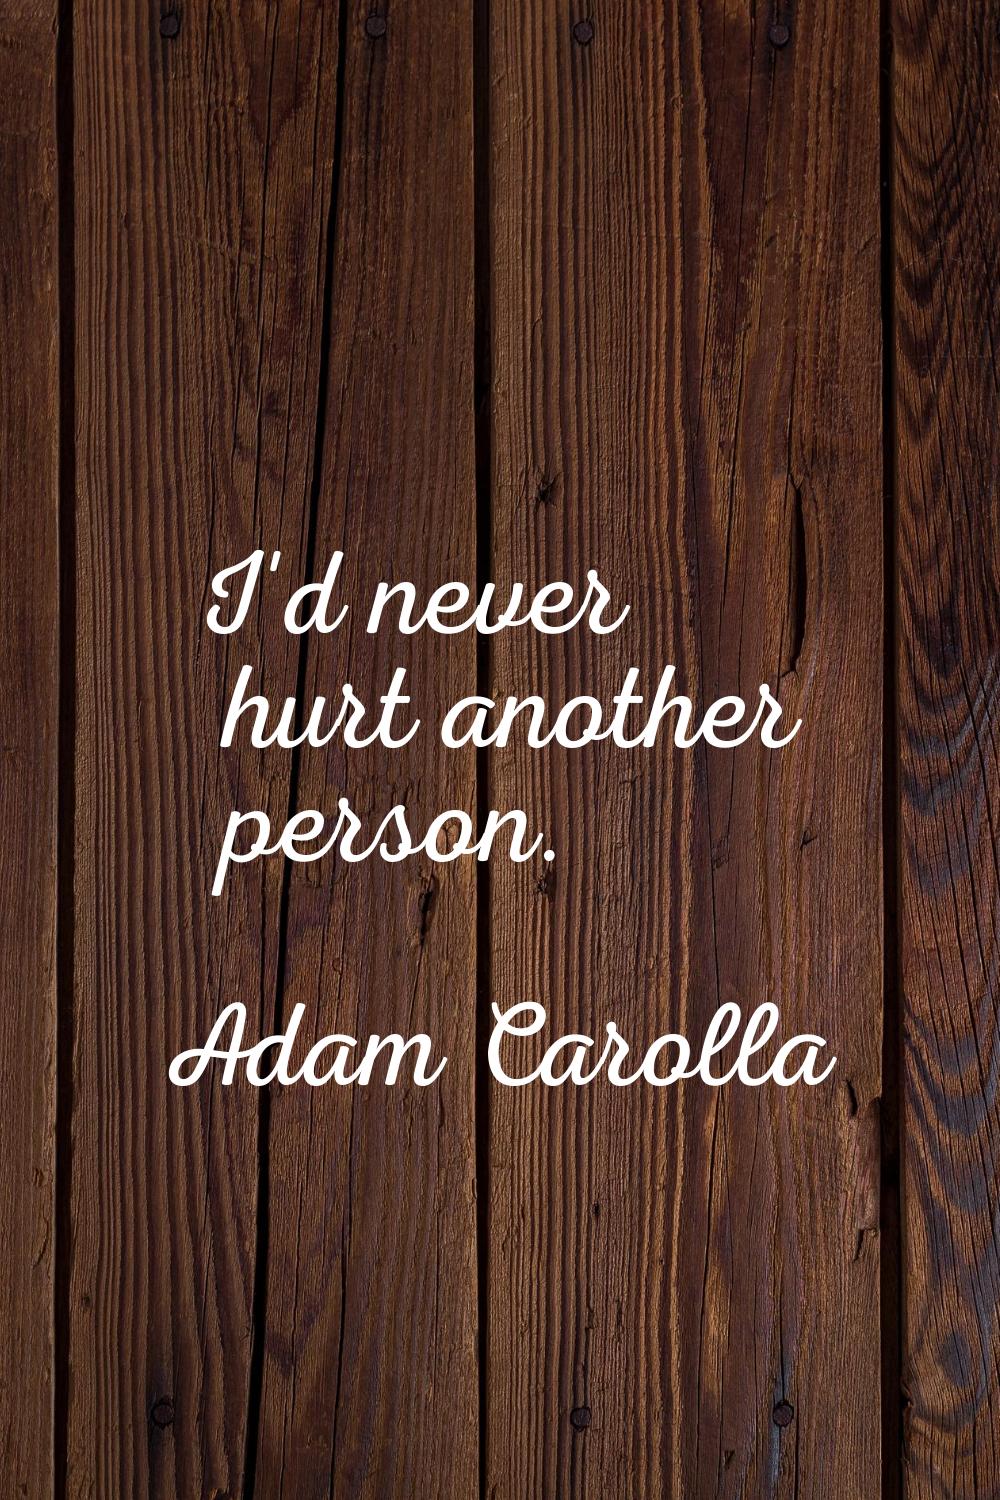 I'd never hurt another person.